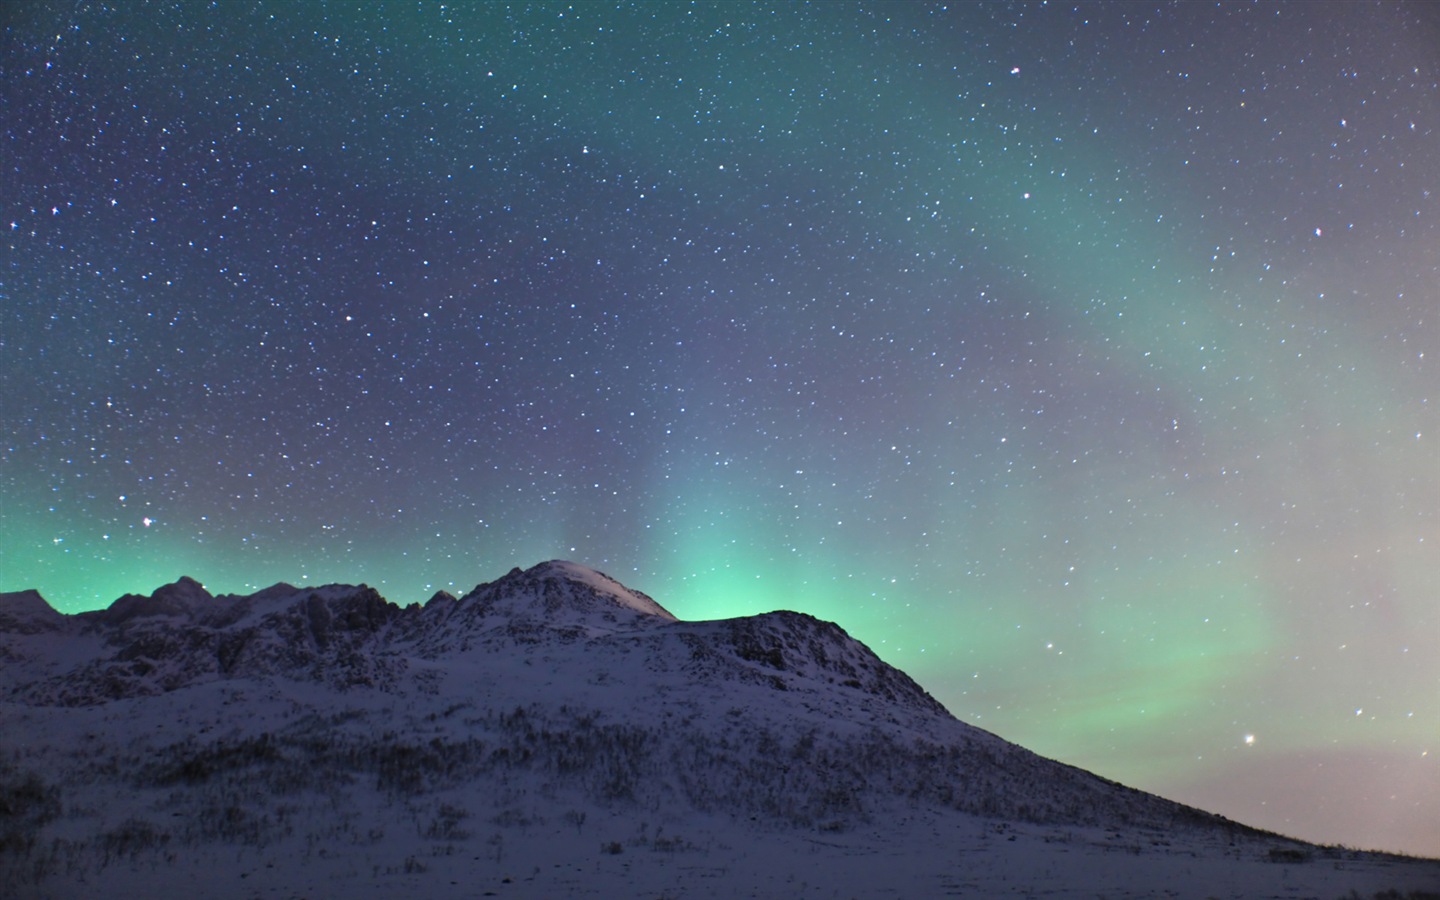 Natural wonders of the Northern Lights HD Wallpaper (2) #17 - 1440x900